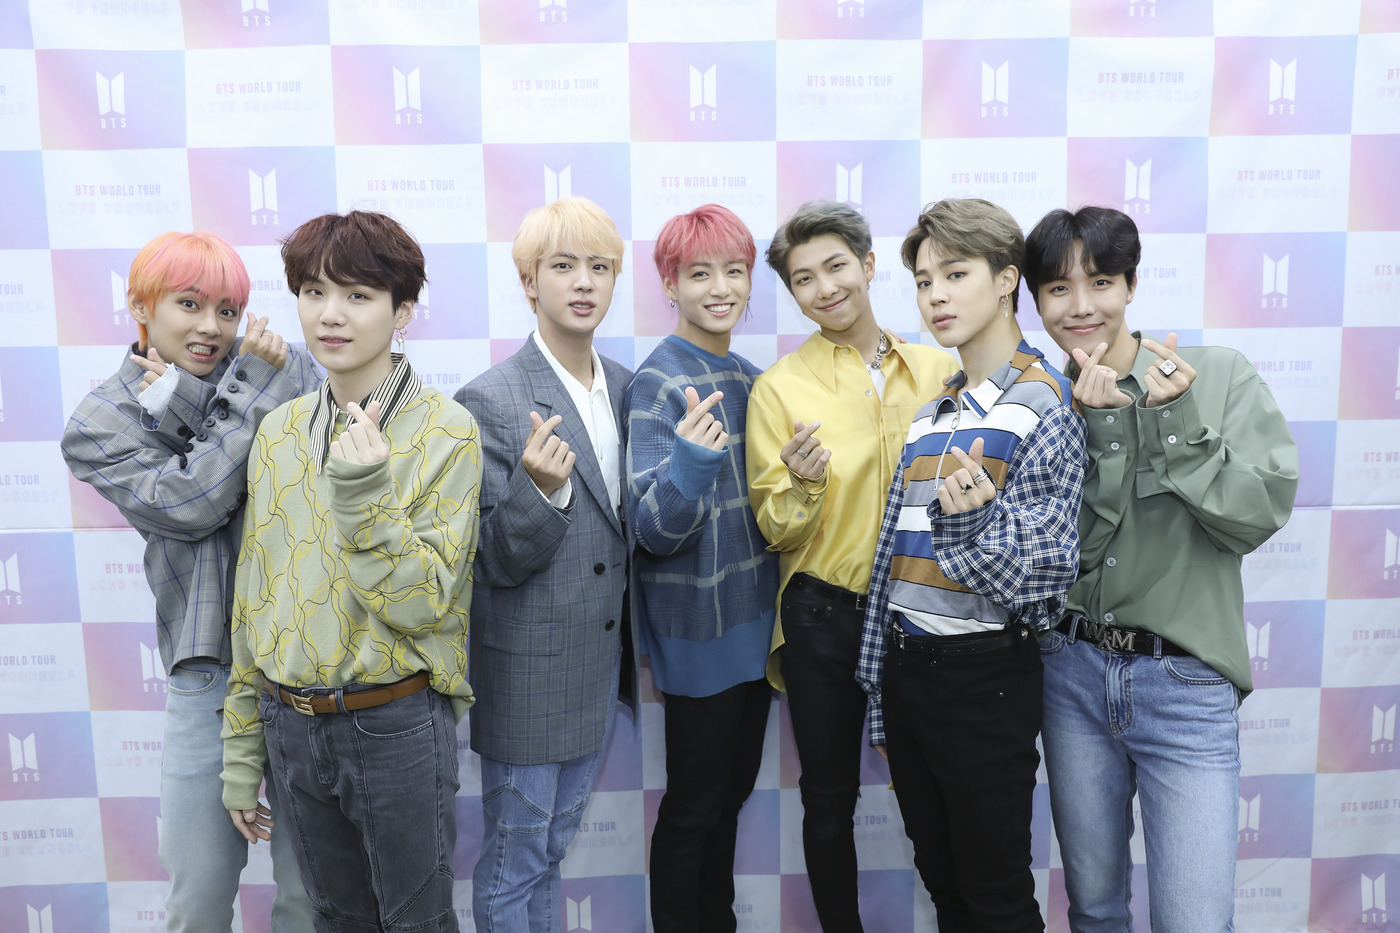 On the afternoon of the 6th (local time), BTS held a concert LOVE YOURSELF at the New York City City Field Stadium in United States of America and met with about 40,000 audiences; the scene was simply a festival.Fans continued to enjoy the flash mob on the spot, singing along with the song.Tent villages were formed around the concert hall, and the New York City Subway Corporation added a subway replacement line to the concert hall.BTS popularity in the World Class class is more meaningful than the success of a simple artist, especially the fact that it has played a frontal game with K Pop, not localized Music.In the meantime, Korean Singers learned local language and culture when they entered overseas markets and released eatingable Music there.This was also quite meaningful, but it was not enough to appeal the images of K Pop and Korea.But BTS was different: they have been playing sophisticated Music in hip-hop and dance genres since their debut, and added the features of K-pop Idol with Kal Gunmu.IDOL released in August was a Music that contained all of these characteristics. Music with the personality of K pop Idol was also popular in World.Overseas fans were interested in their Music and Performance rather than unfamiliar, and BTS achieved the achievement of climbing the Billboard main chart.Naturally, the status of K pop in World Music market has also increased.BTS also contributed to the enhancement of the national image beyond the Korean Wave craze, and they were loved all over World for their outstanding Performances and Music.This naturally led to the interest of overseas fans toward Korea and helped to raise their liking for Korea.BTS also spoke up on behalf of the younger generation.BTS attended the UNICEFs youth agenda Generation Unlimited presentation event at the Trusteeship Council Chamber of the United Nations Headquarters in New York City on the 24th (local time).Leader RM is a normal young man in Korea and a leader of BTS, and delivered a message to the younger generation with personal experience.It is the first time a Korean Singer has made a speech on behalf of a younger generation on the UN stage, showing that the image of Korea has changed positively.The Idol, who was doing personal Music with a message of autobiographical story and comfort for youth, took their Music and Performance and went forward to World market.Their achievements have been evaluated as entering the K-pop world market beyond the success of Korean Singer.